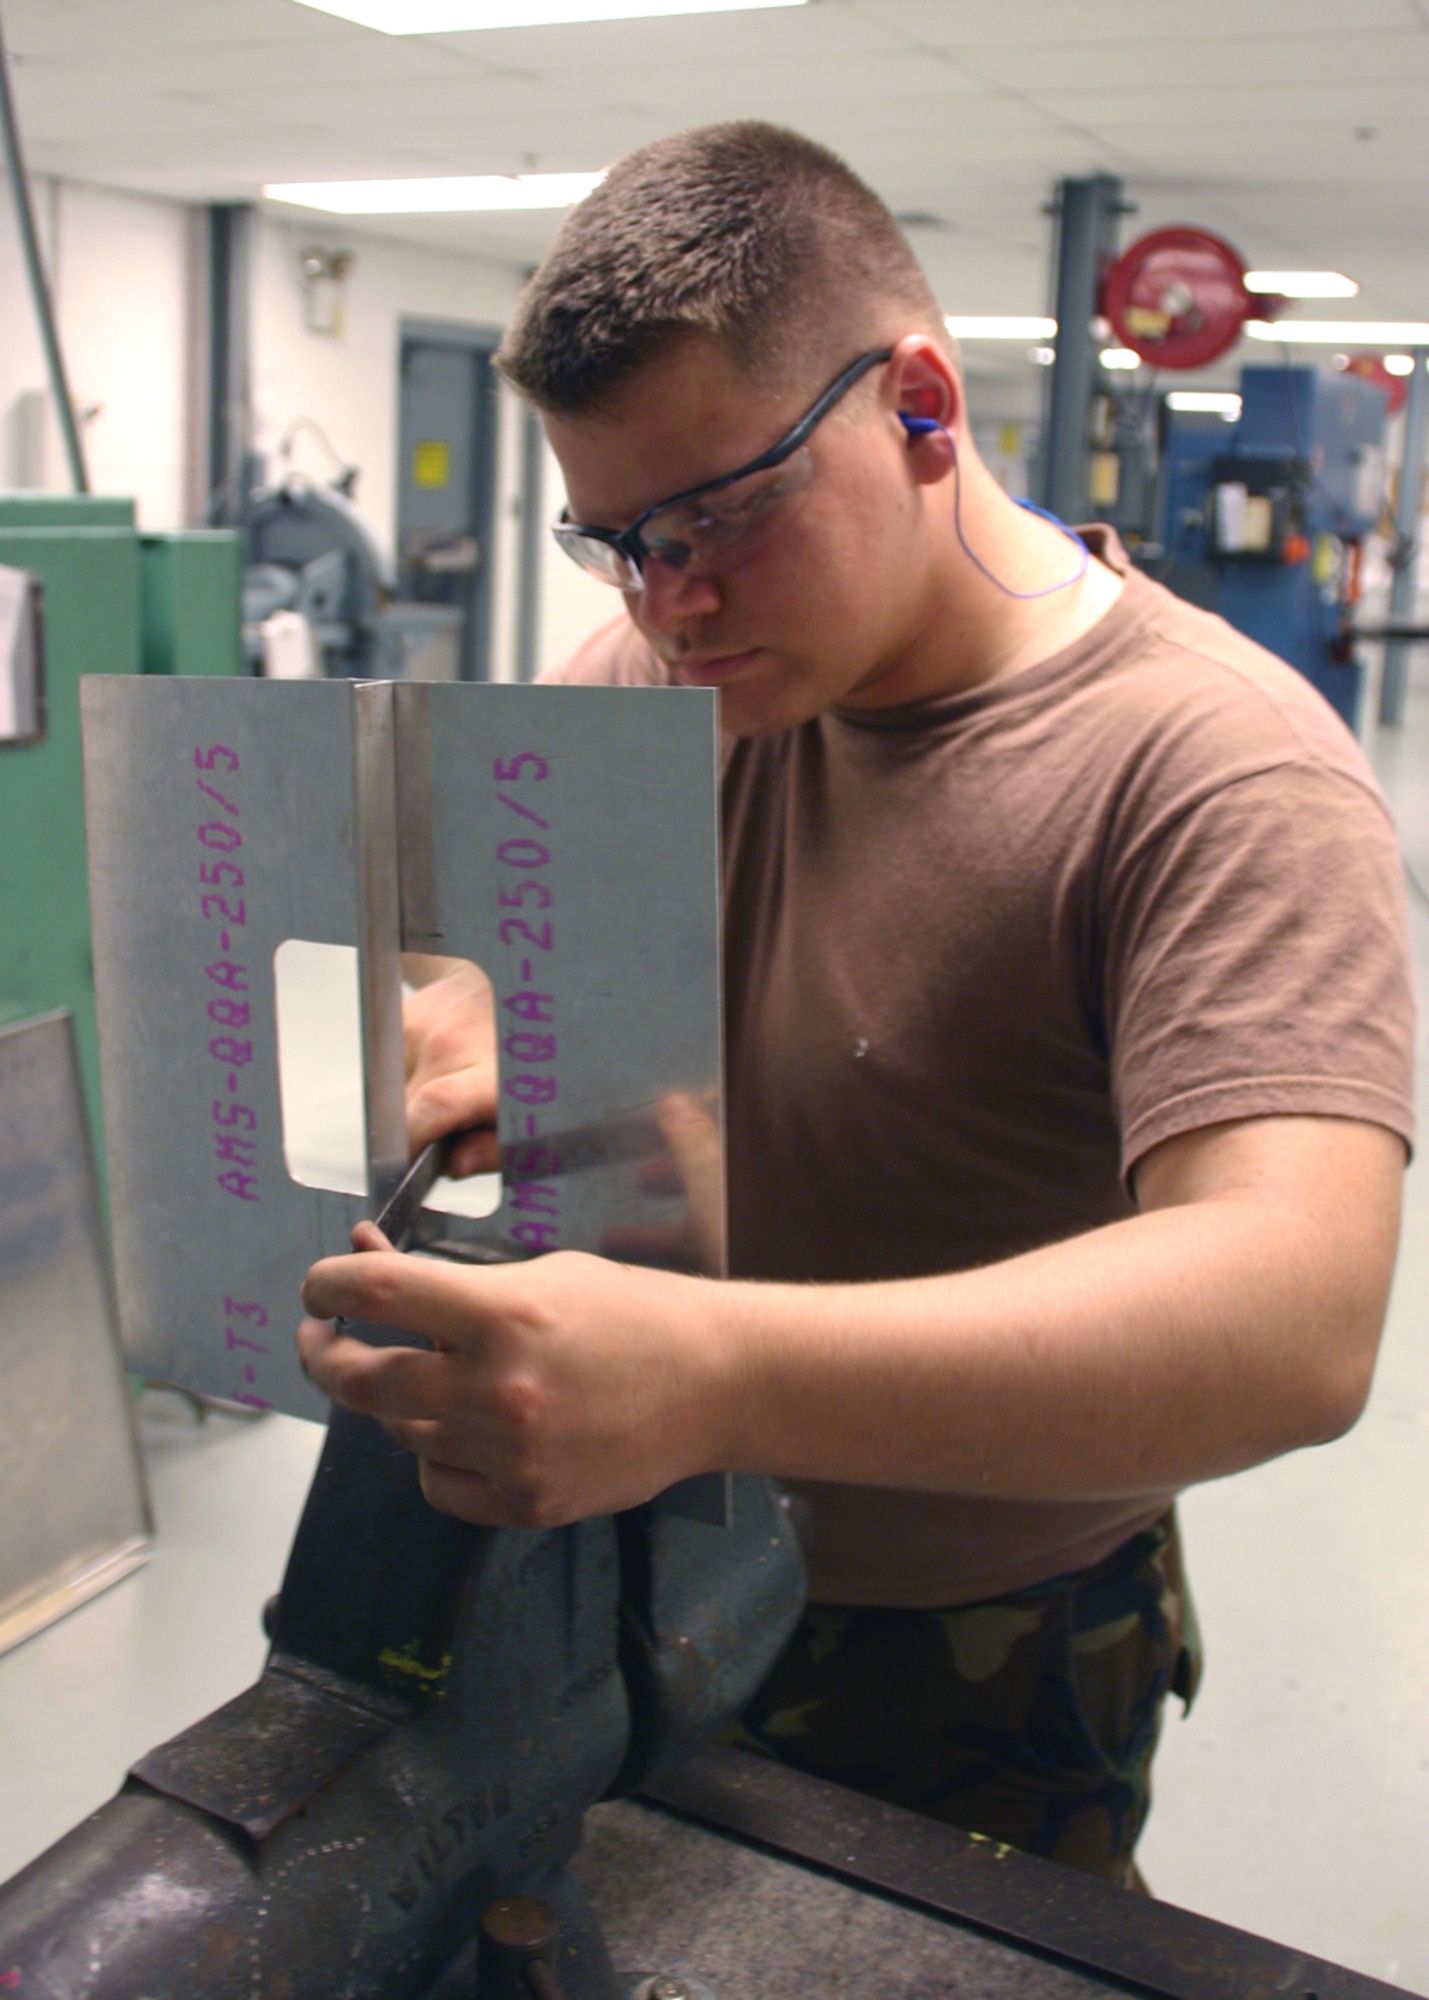 Airman 1st Class Aaron Gilks, 552nd Maintenance Squadron Fabrication Flight, completes a training project for his upgrade training.  Members of the Fabrication Flight are known by many in the 552nd Maintenance Group for their ability to create numerous items out of sheet metal.  (Photo by Staff Sgt. Stacy Fowler)